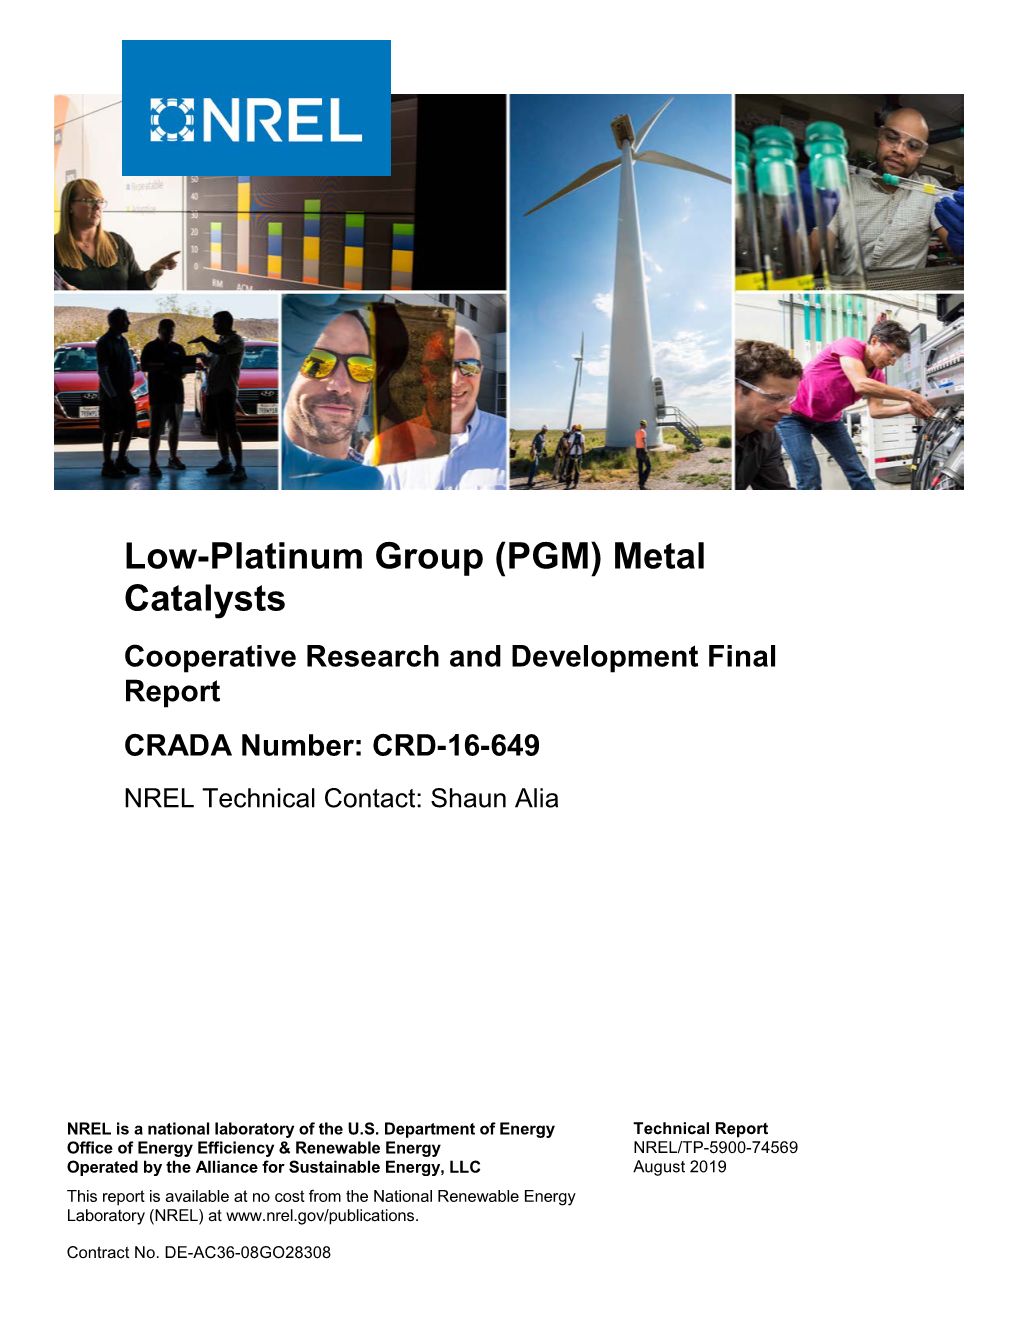 Low-Platinum Group (PGM) Metal Catalysts Cooperative Research and Development Final Report CRADA Number: CRD-16-649